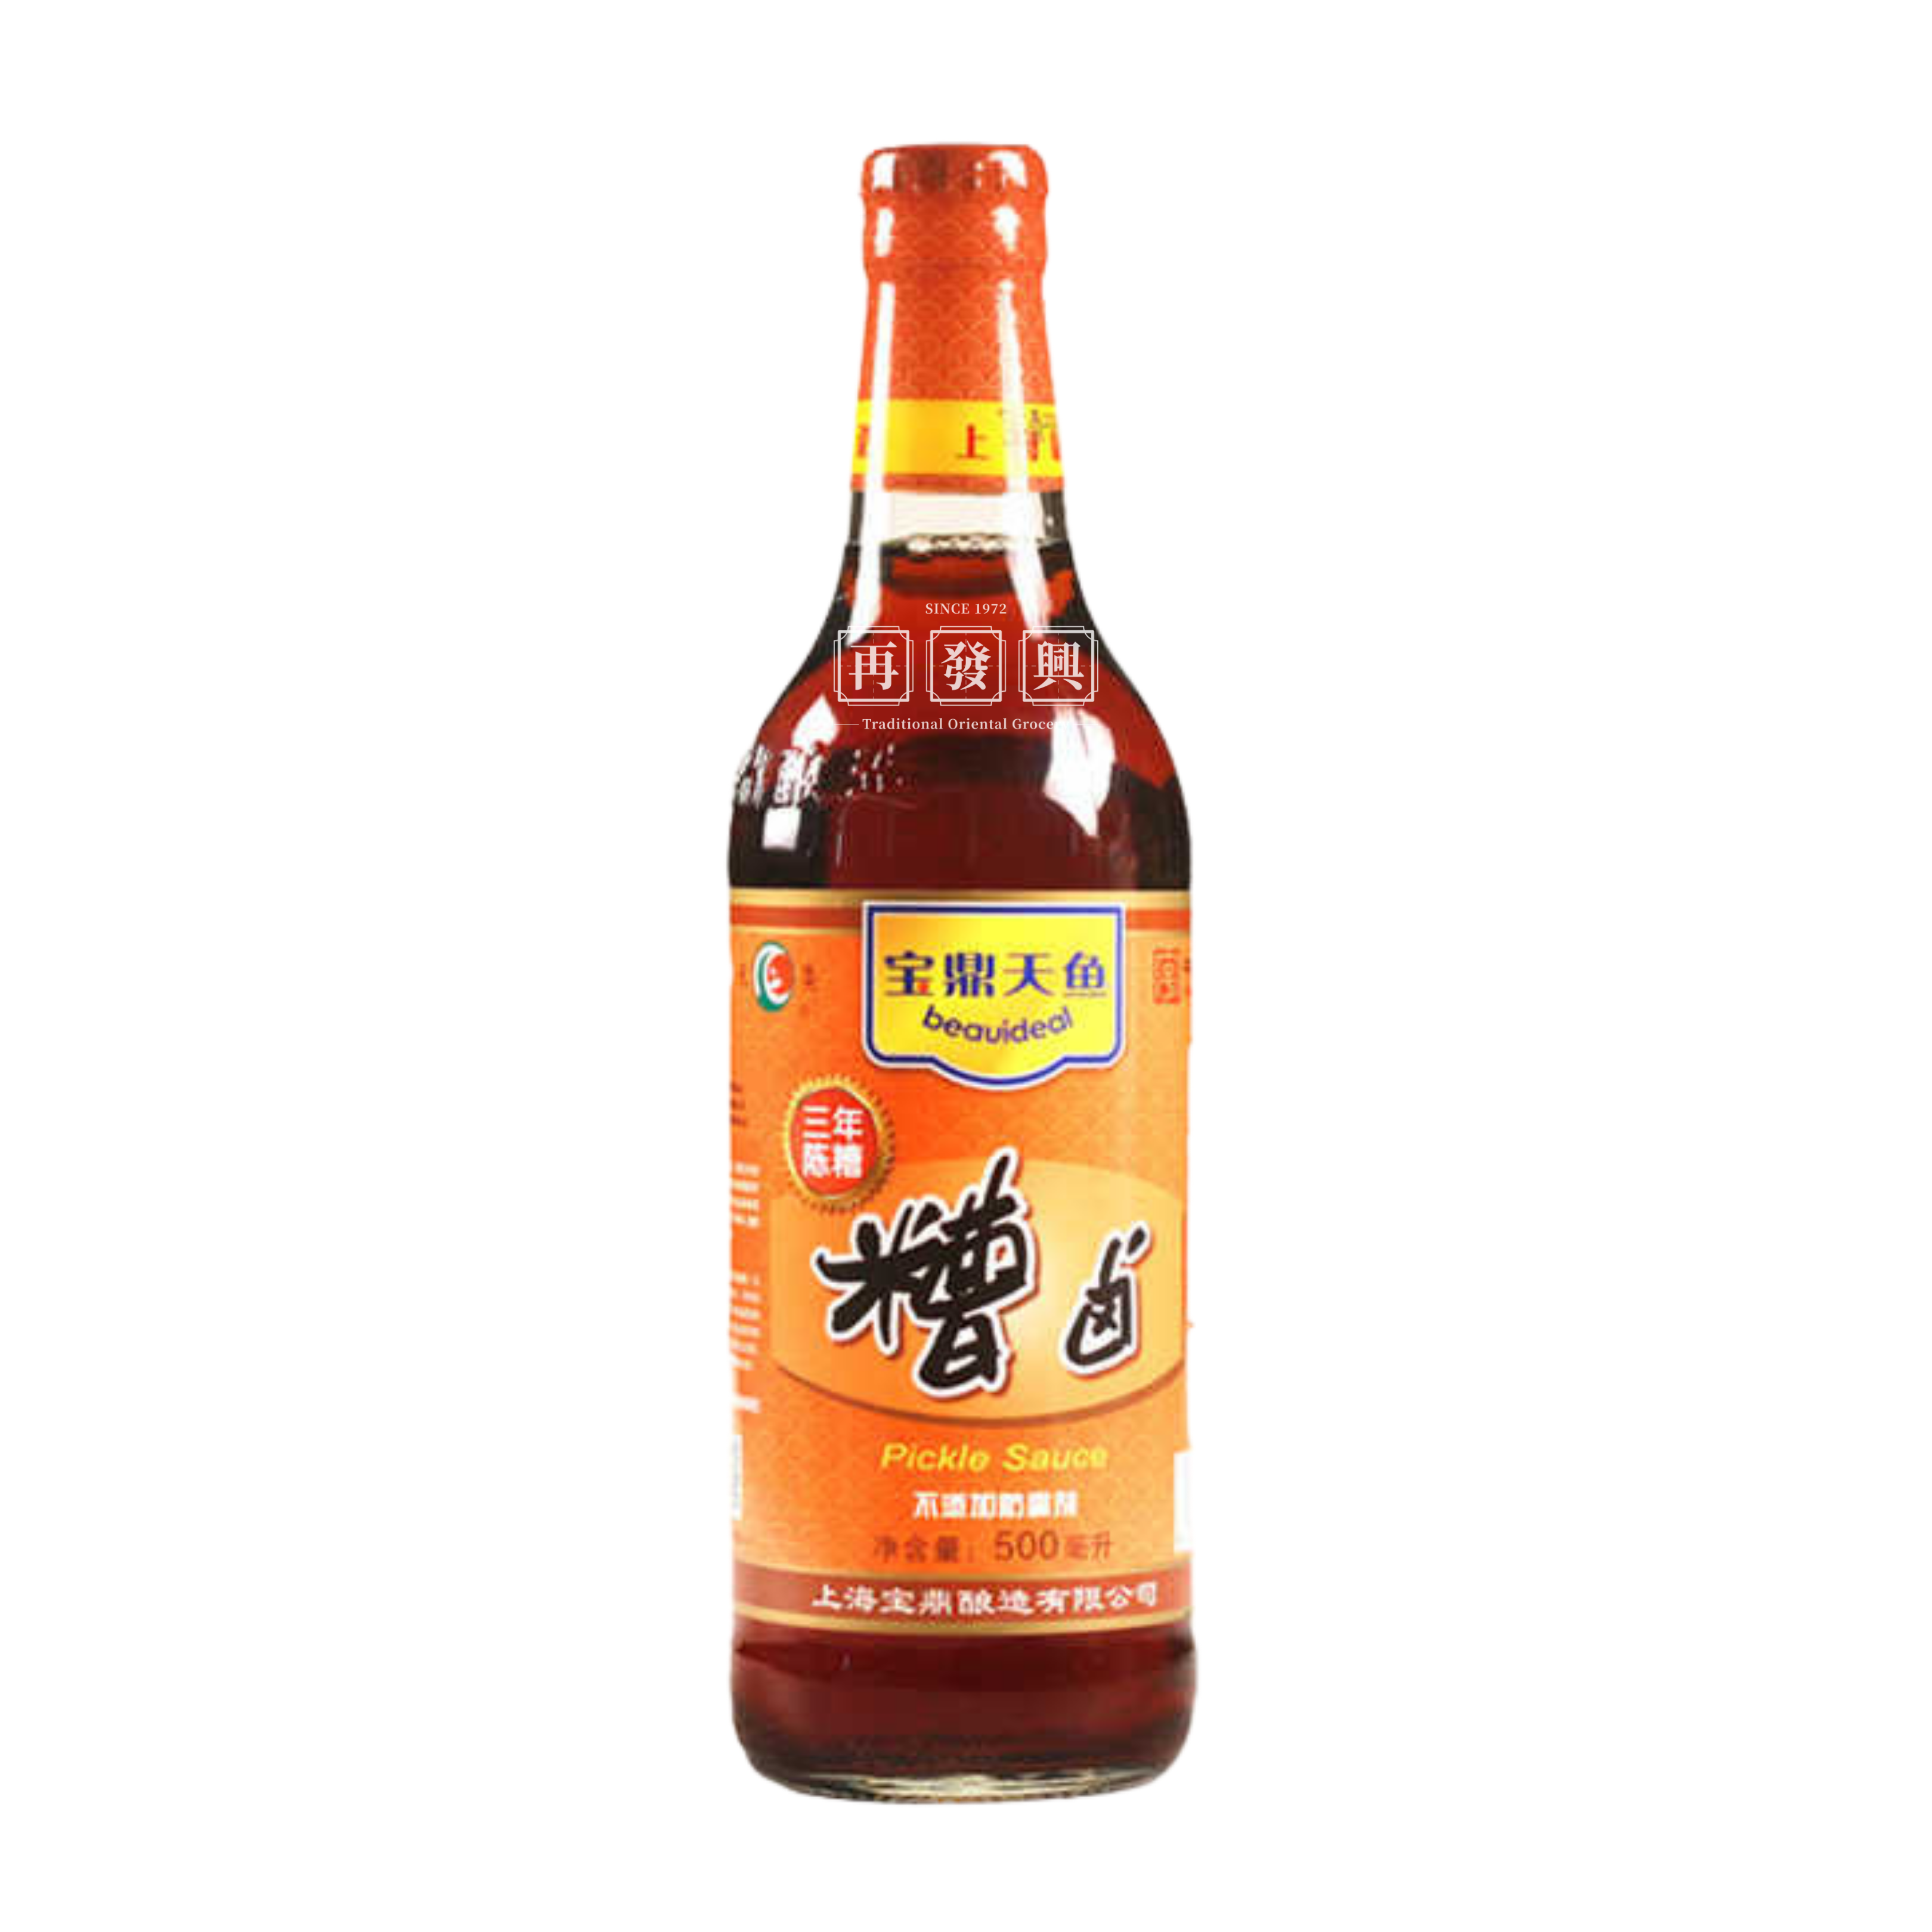 Beauideal Aged Pickle Sauce 宝鼎天鱼糟卤(三年陈糟) 500ml